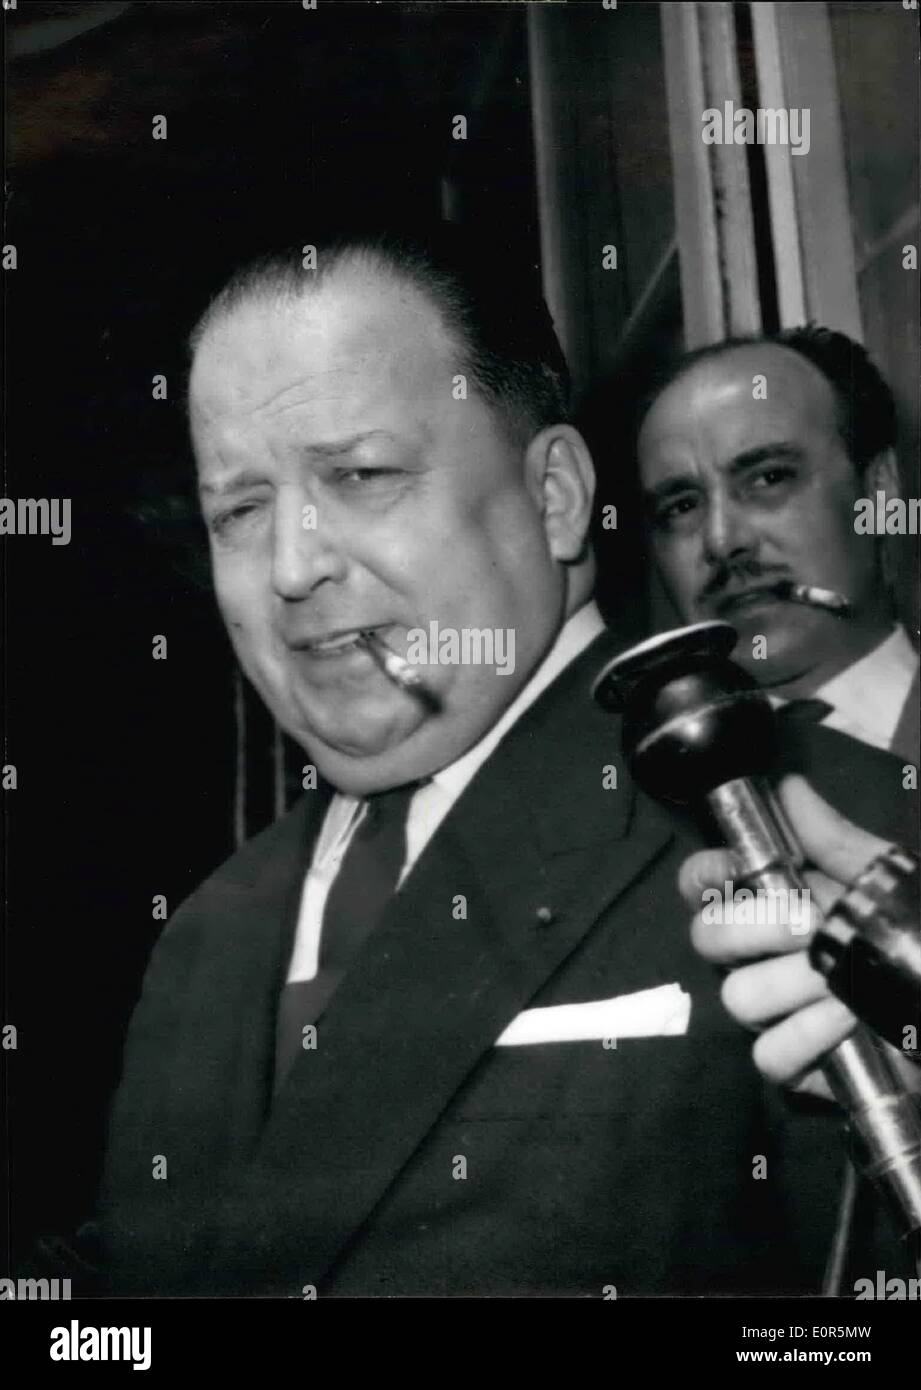 Apr. 04, 1958 - French Cabinet Crisis: As the first steps in his efforts to from the new cabinet, M. Rene Pleven is now endeavoring to achieve political unity over the Algerian problem. Photo Shows:- M. Robert Lacoste, Minister of Algeria, after meeting M. Pleven this morning Stock Photo